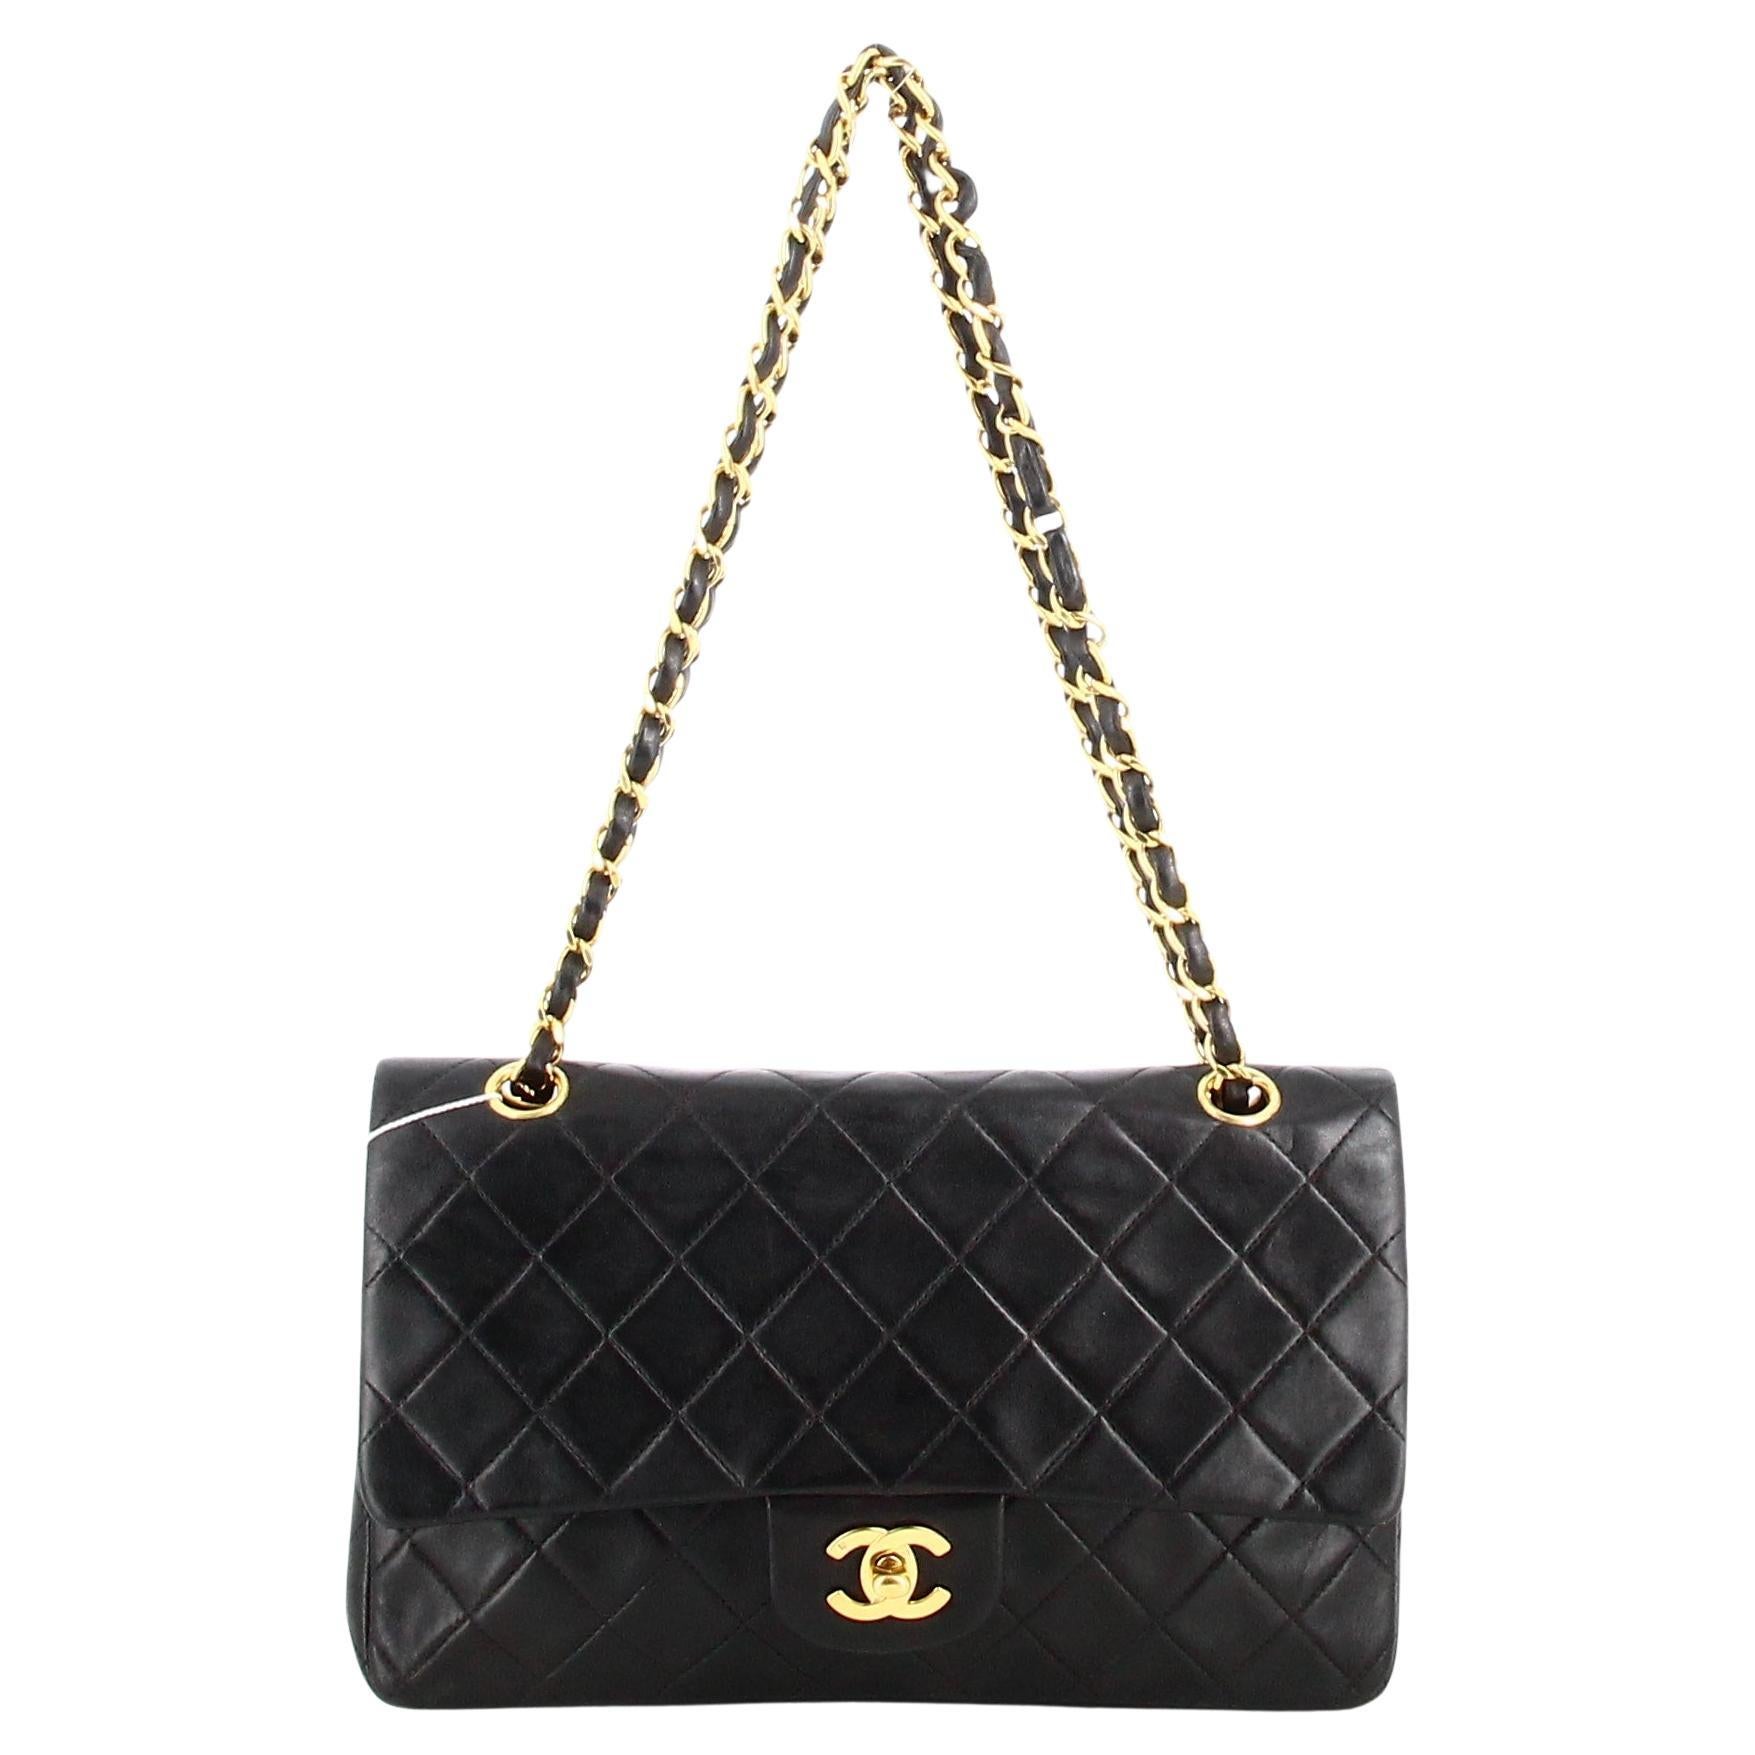 1991 Chanel Timeless Handbag In Black Quilted Leather 